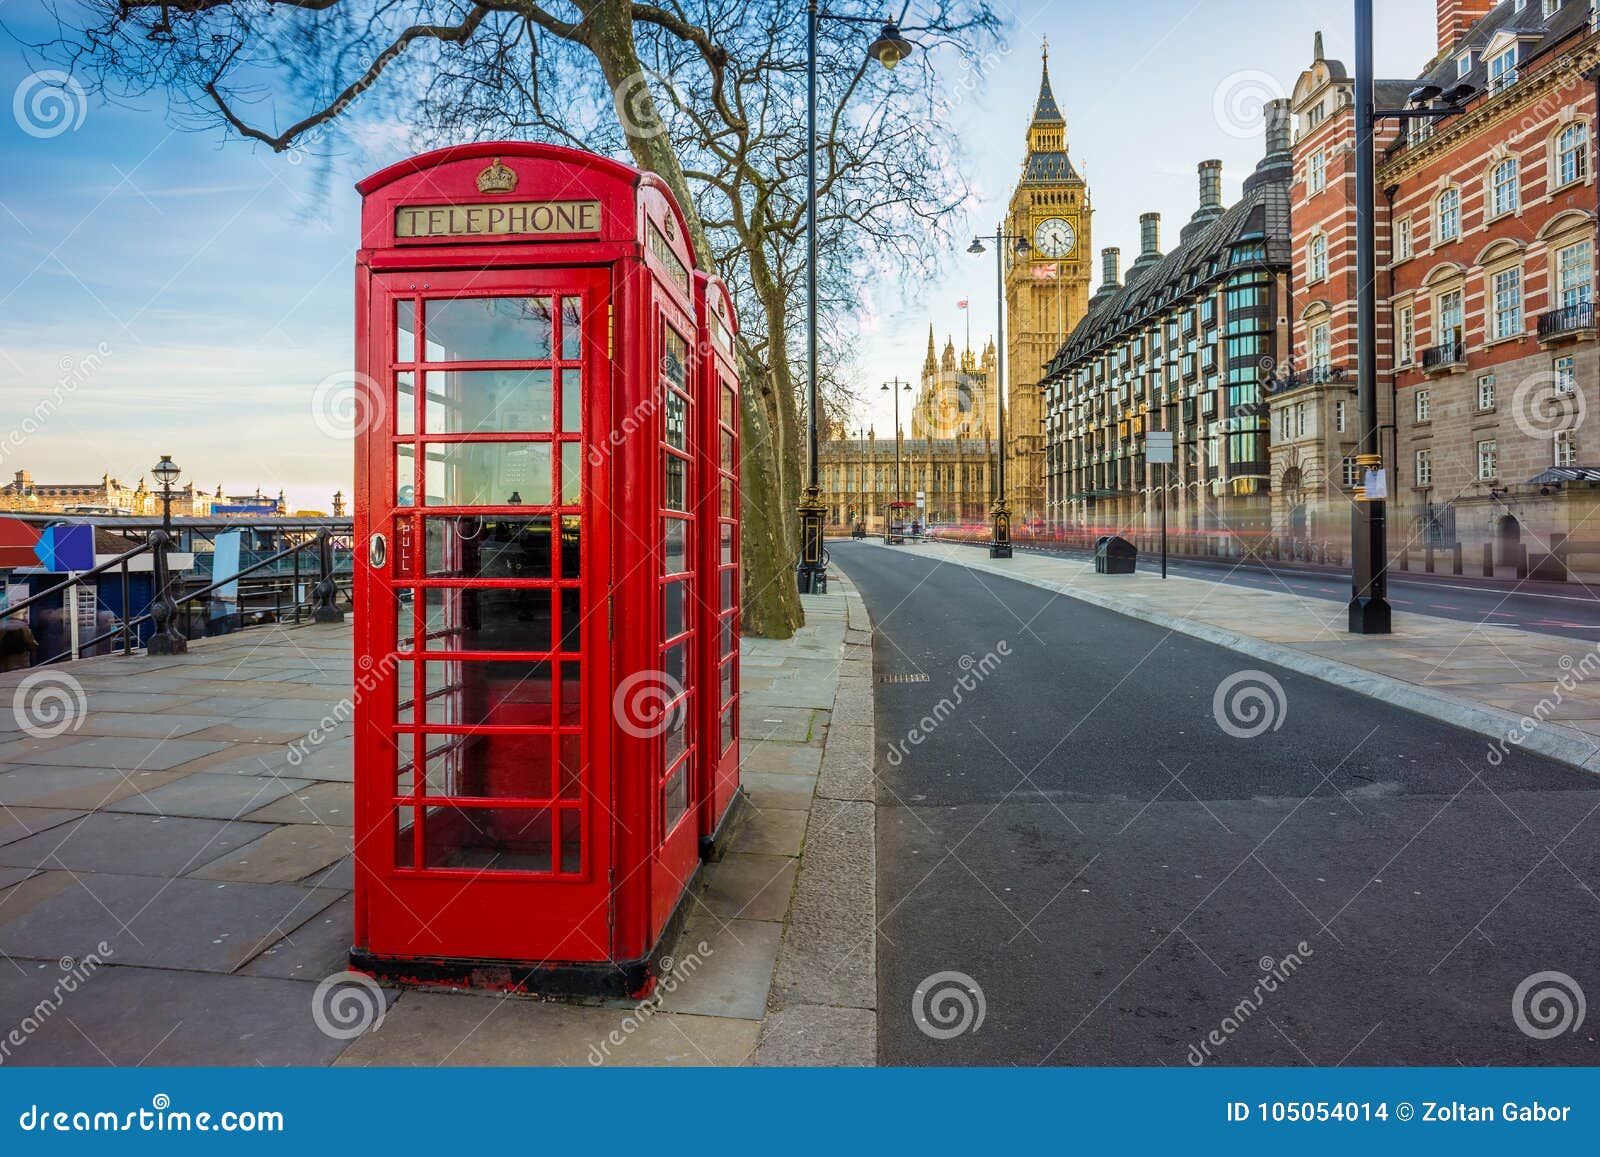 london, england - traditional old british red telephone box at victoria embankment with big ben